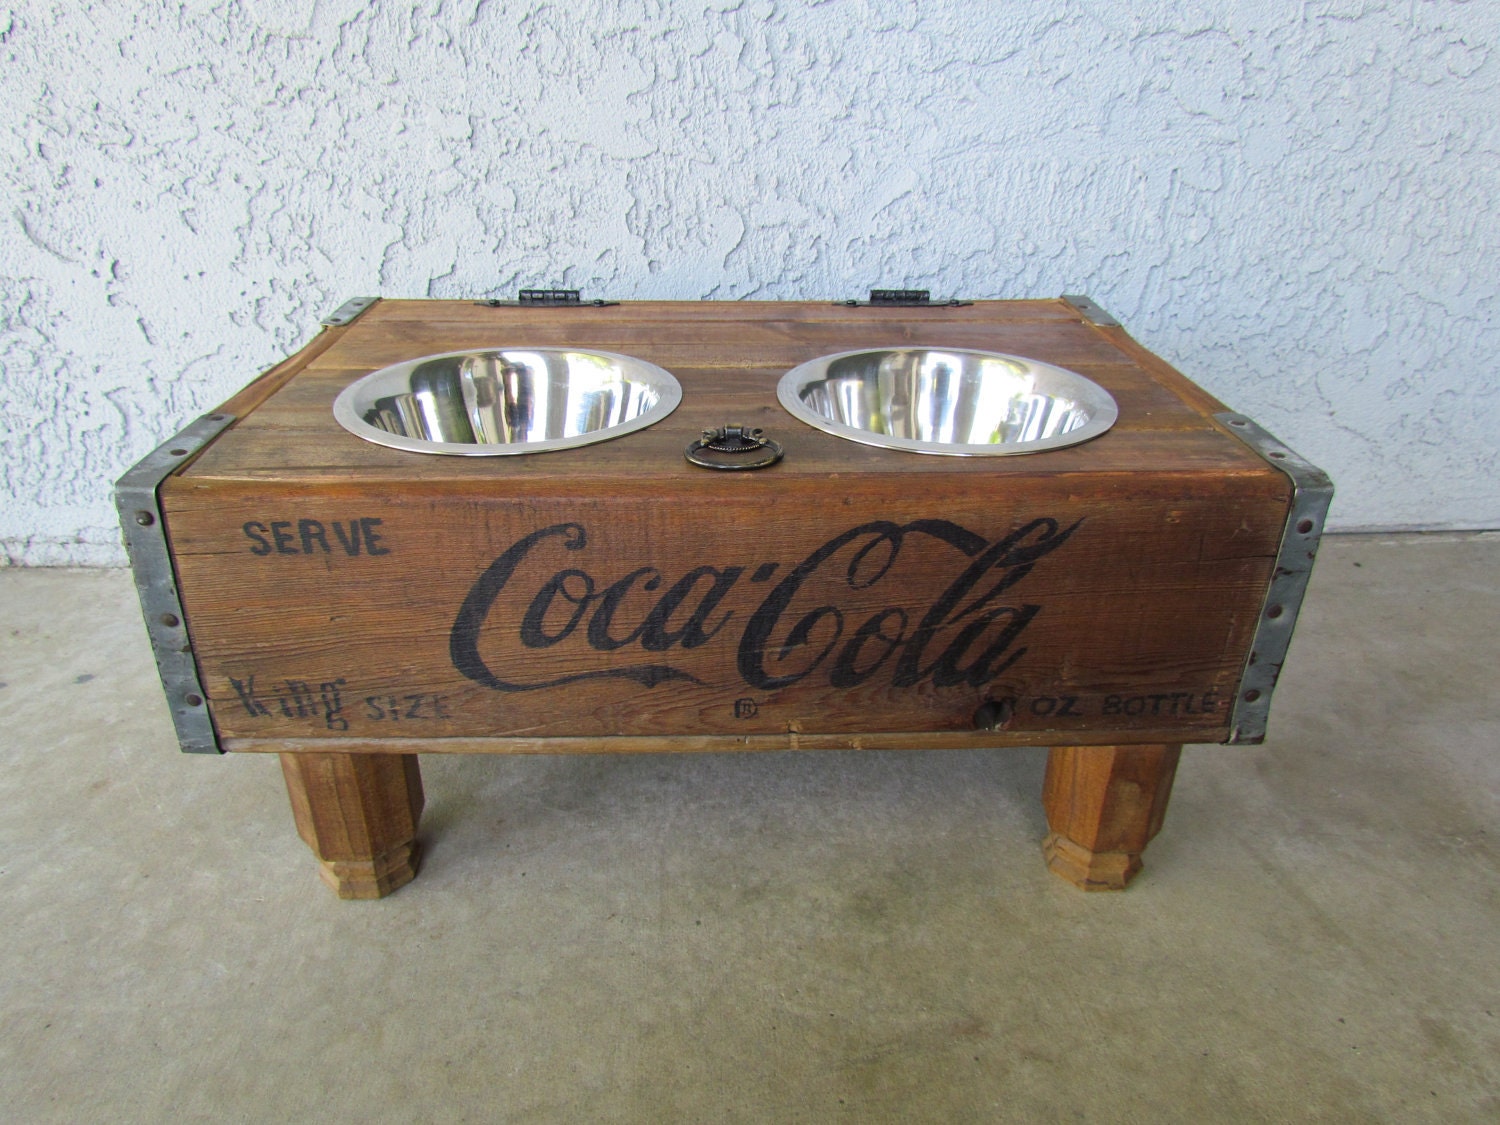 dog bowl holder pet elevated feeder and storage station made from a Coca Cola crate repurposed into pet dish upchucked Vintage 4paws - VintageCrateFeeders